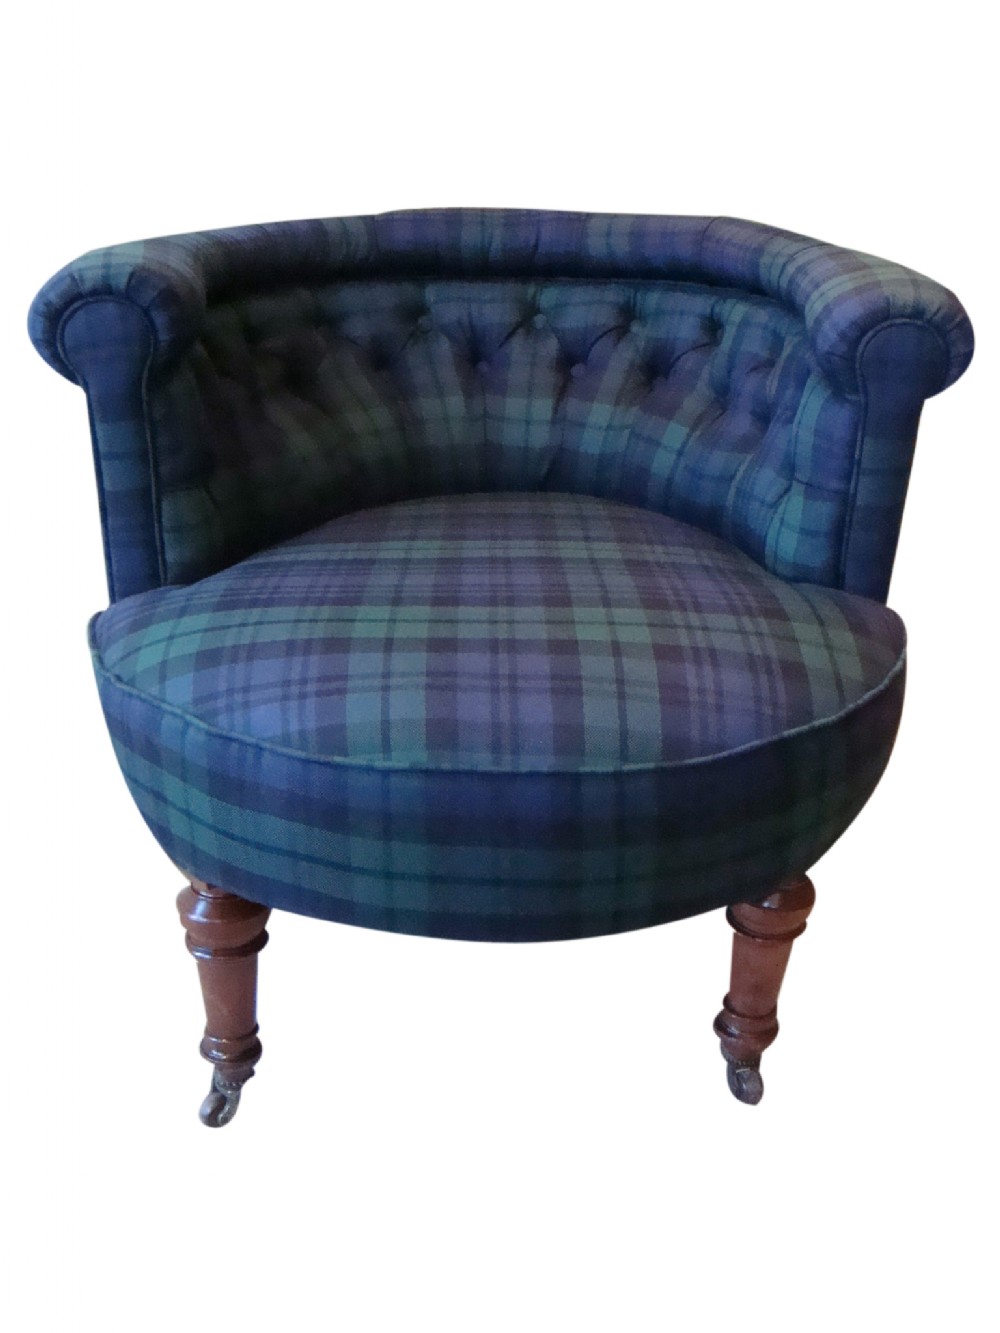 a delightful victorian tubnursery chair with new upholstery